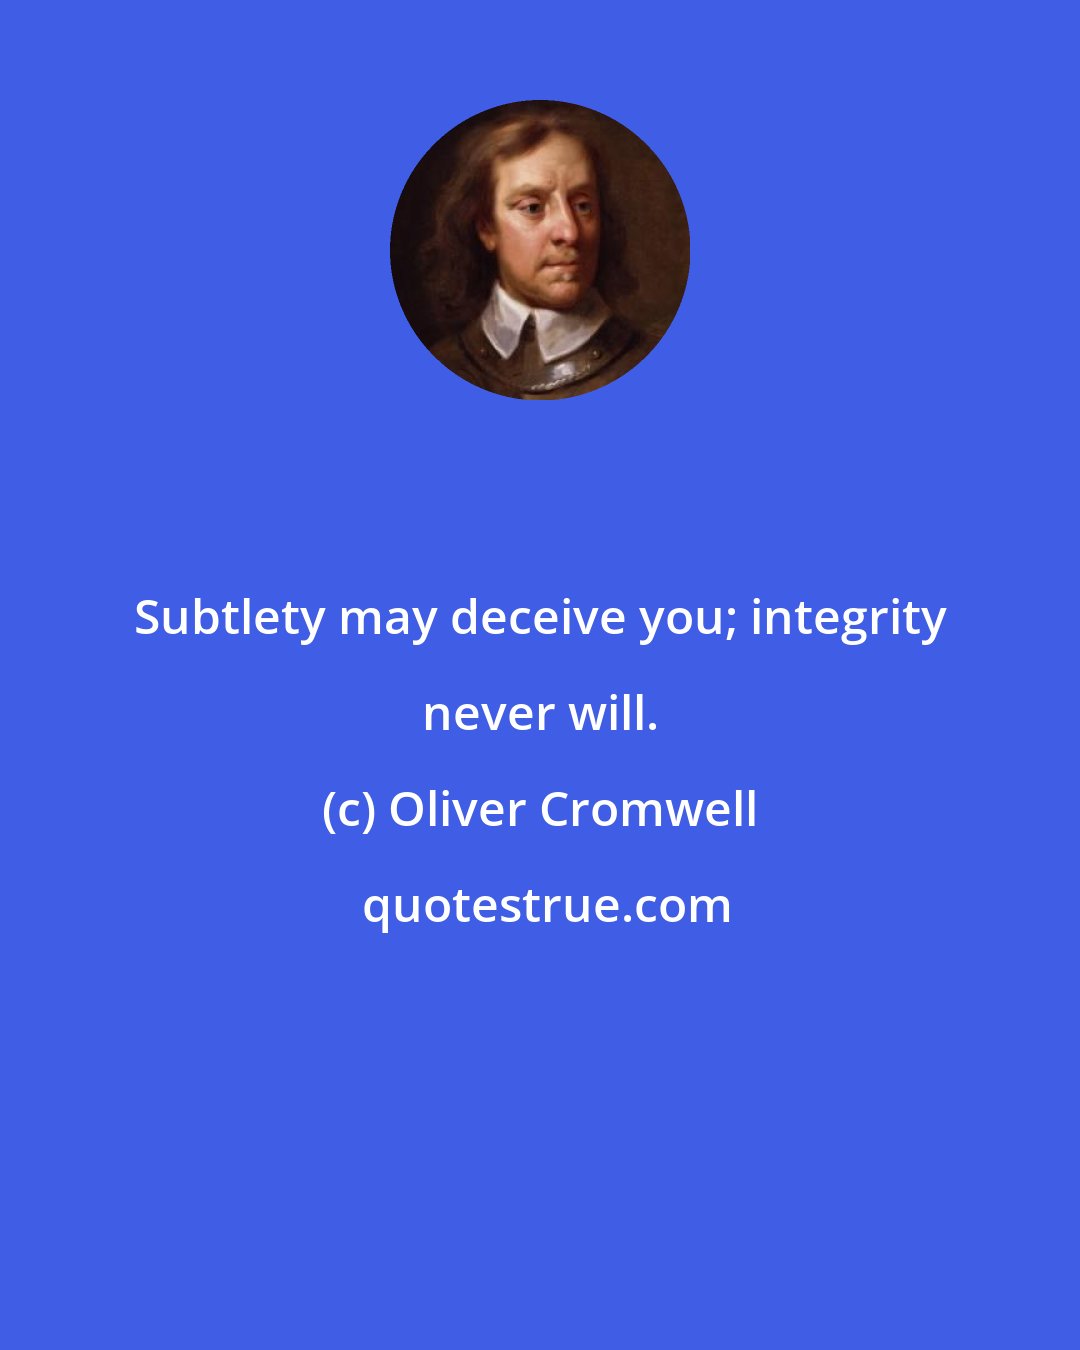 Oliver Cromwell: Subtlety may deceive you; integrity never will.